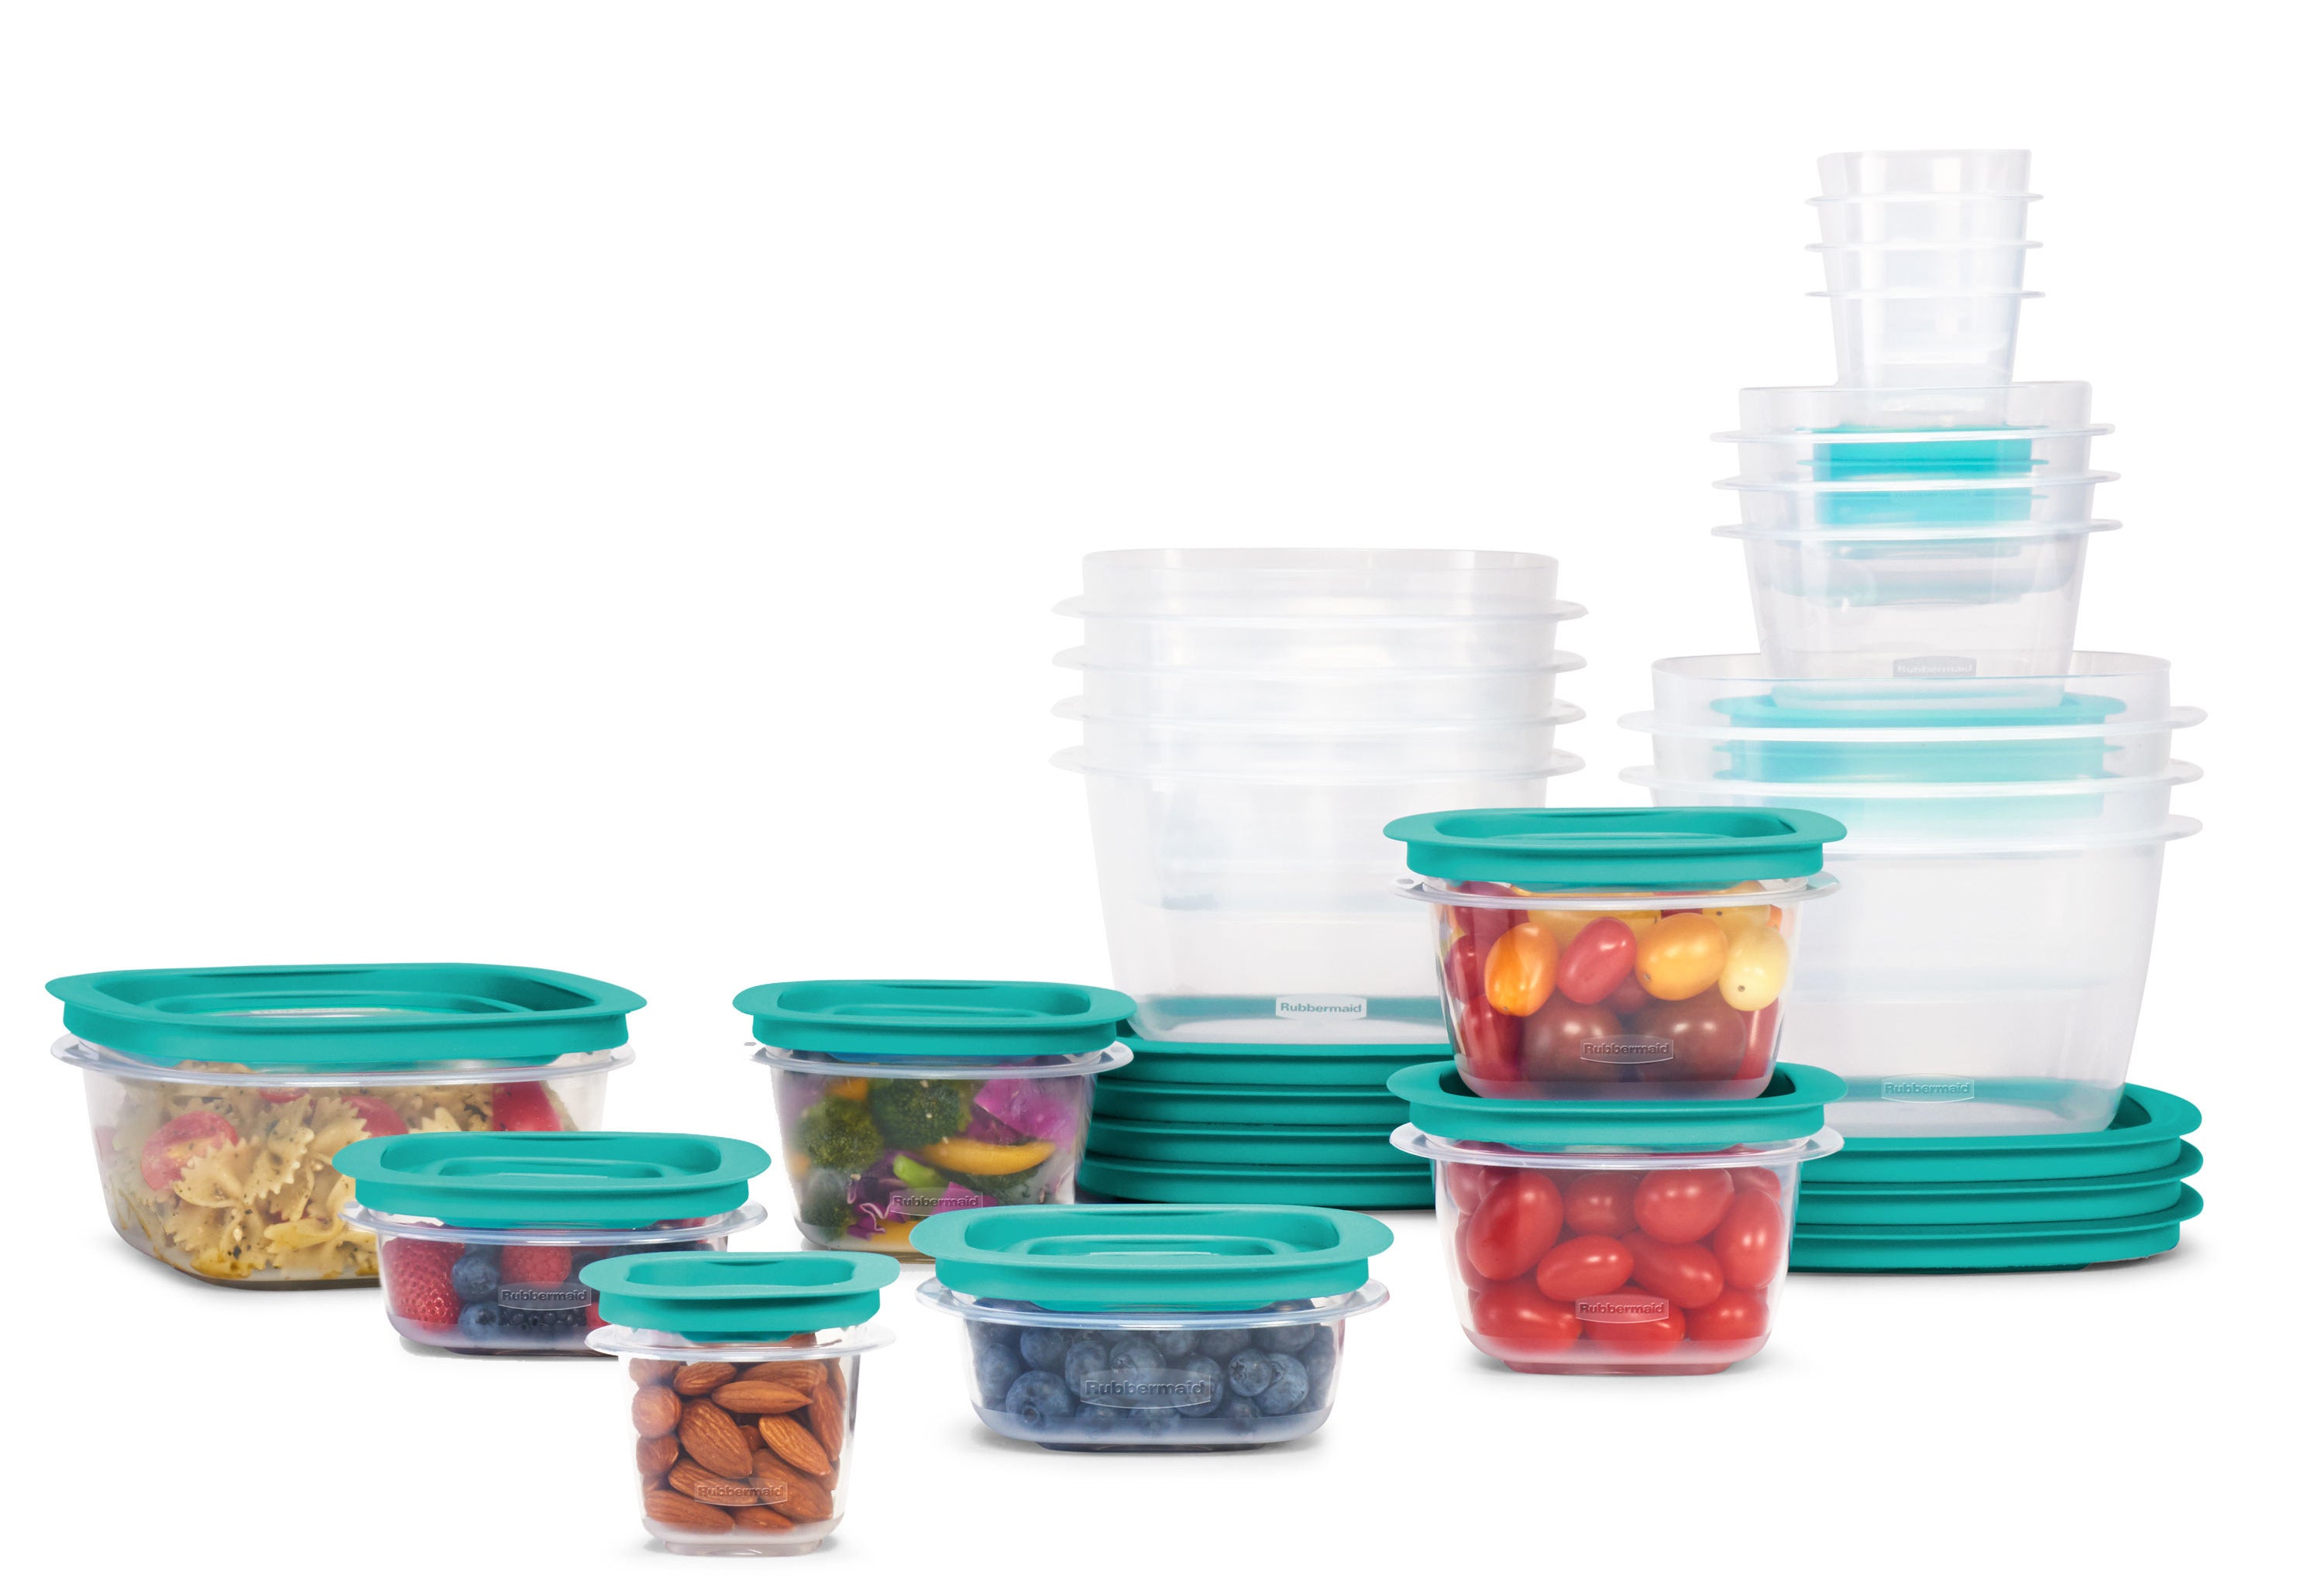 a 42 piece set of rubbermaid food storage containers with teal lids